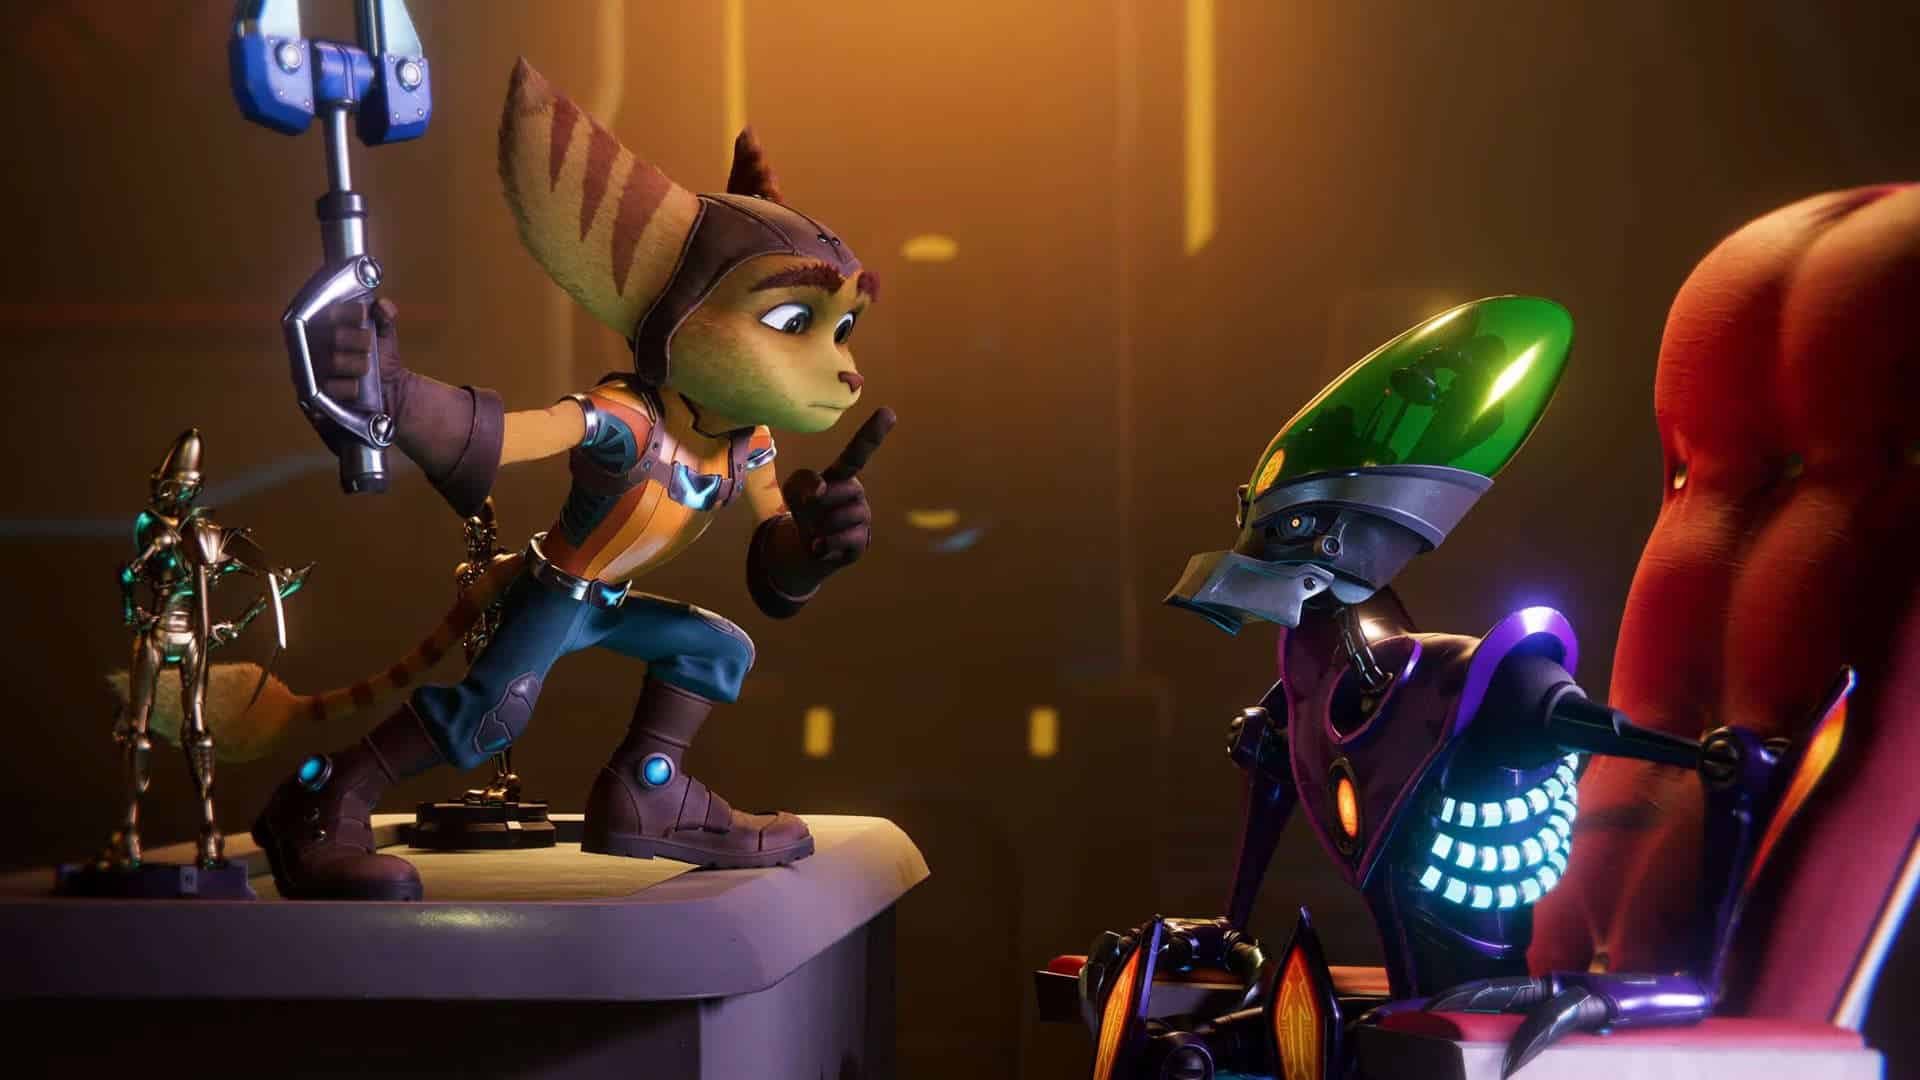 Insomniac Games Didn’t Crunch Once During Ratchet and Clank Development